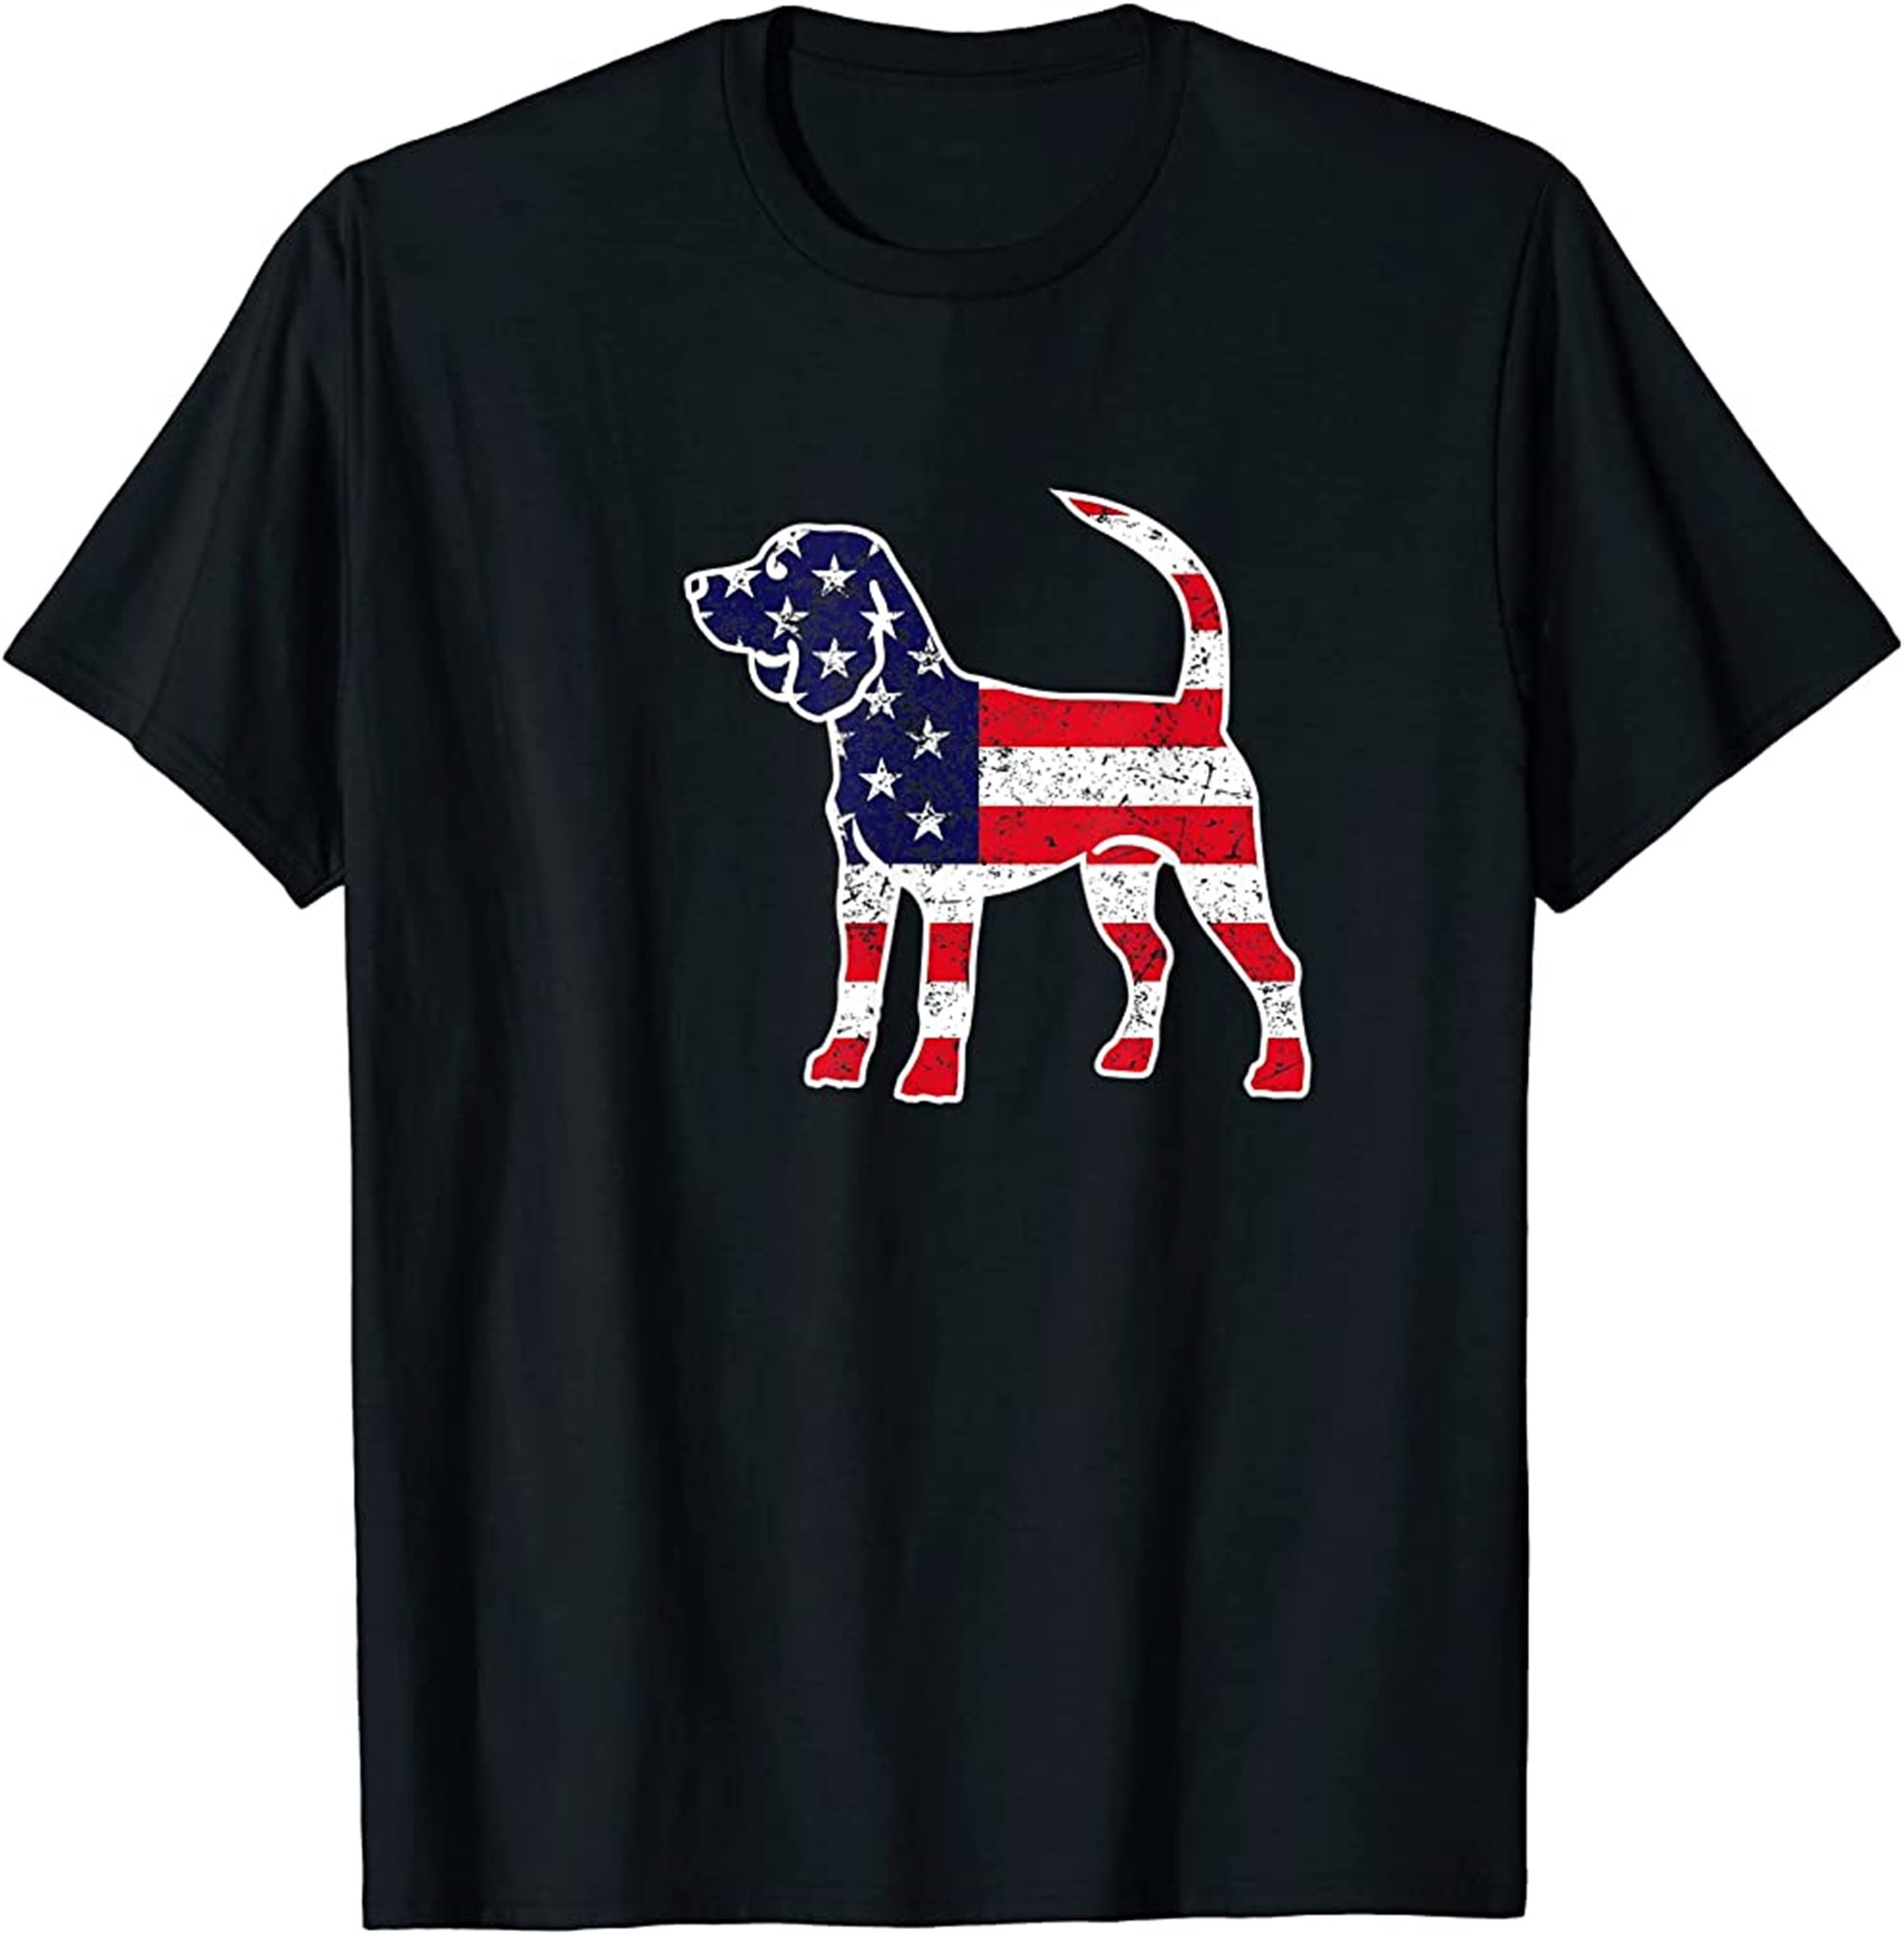 4th Of July Beagle Dog Graphic Patriotic Usa American Flag T-shirt Plus Size Up To 5xl